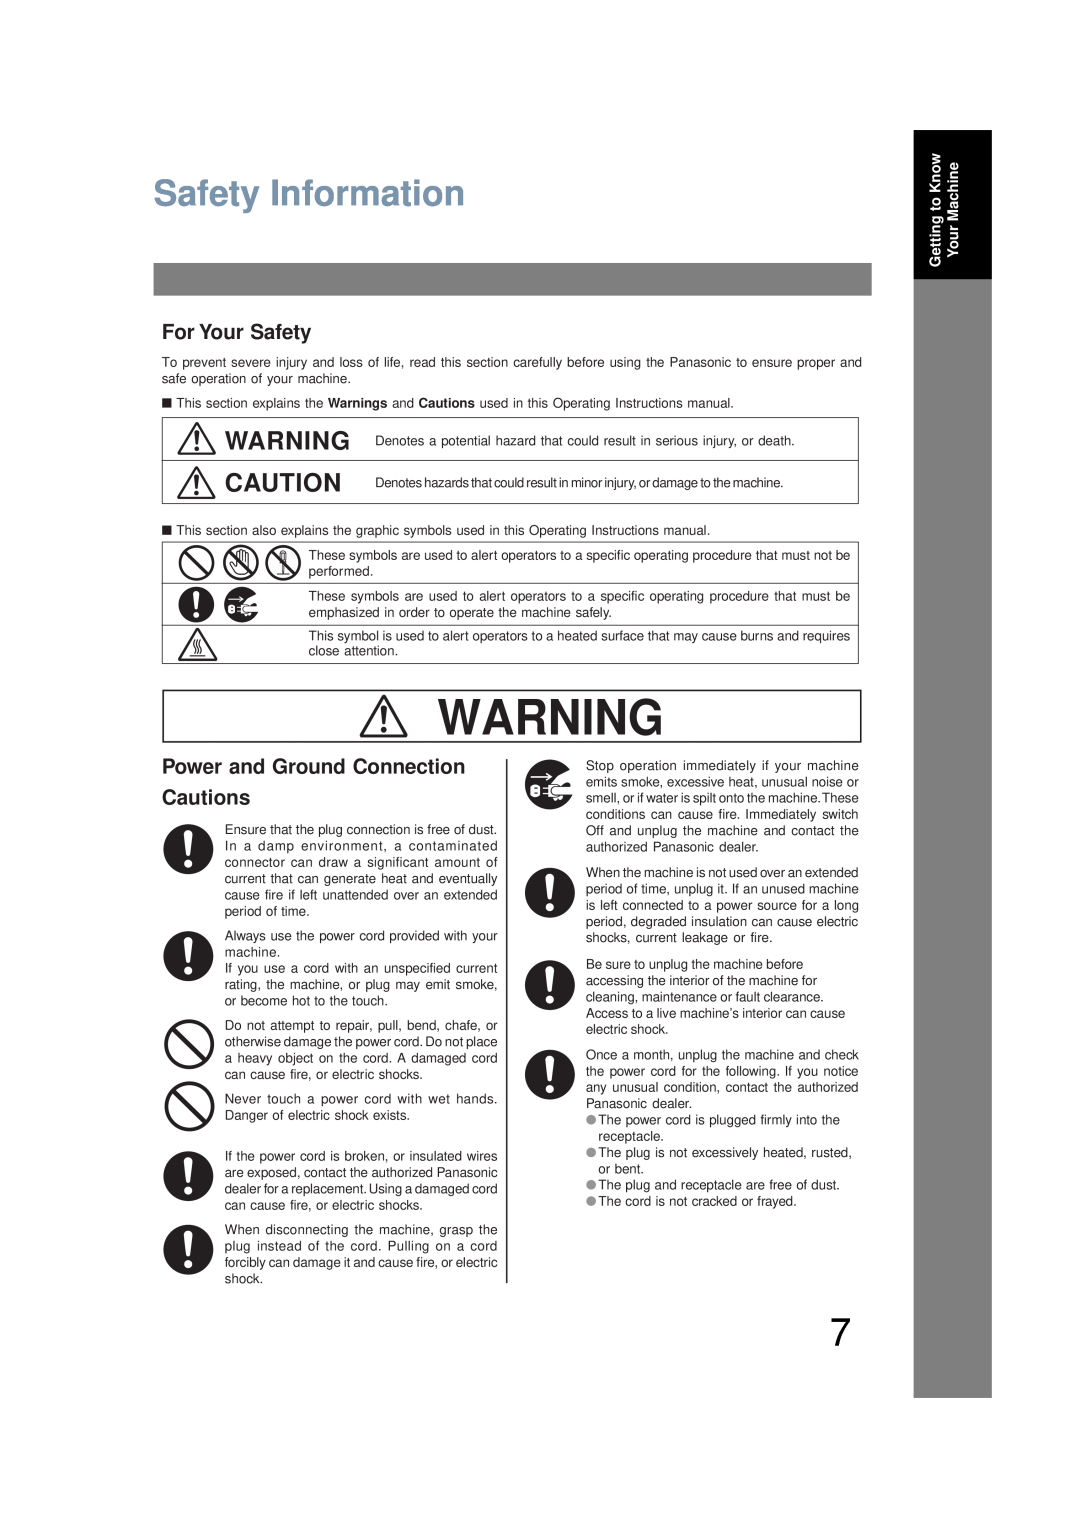 Panasonic UF-6200 Safety Information, For Your Safety, Power and Ground Connection Cautions, Getting to Know Your Machine 